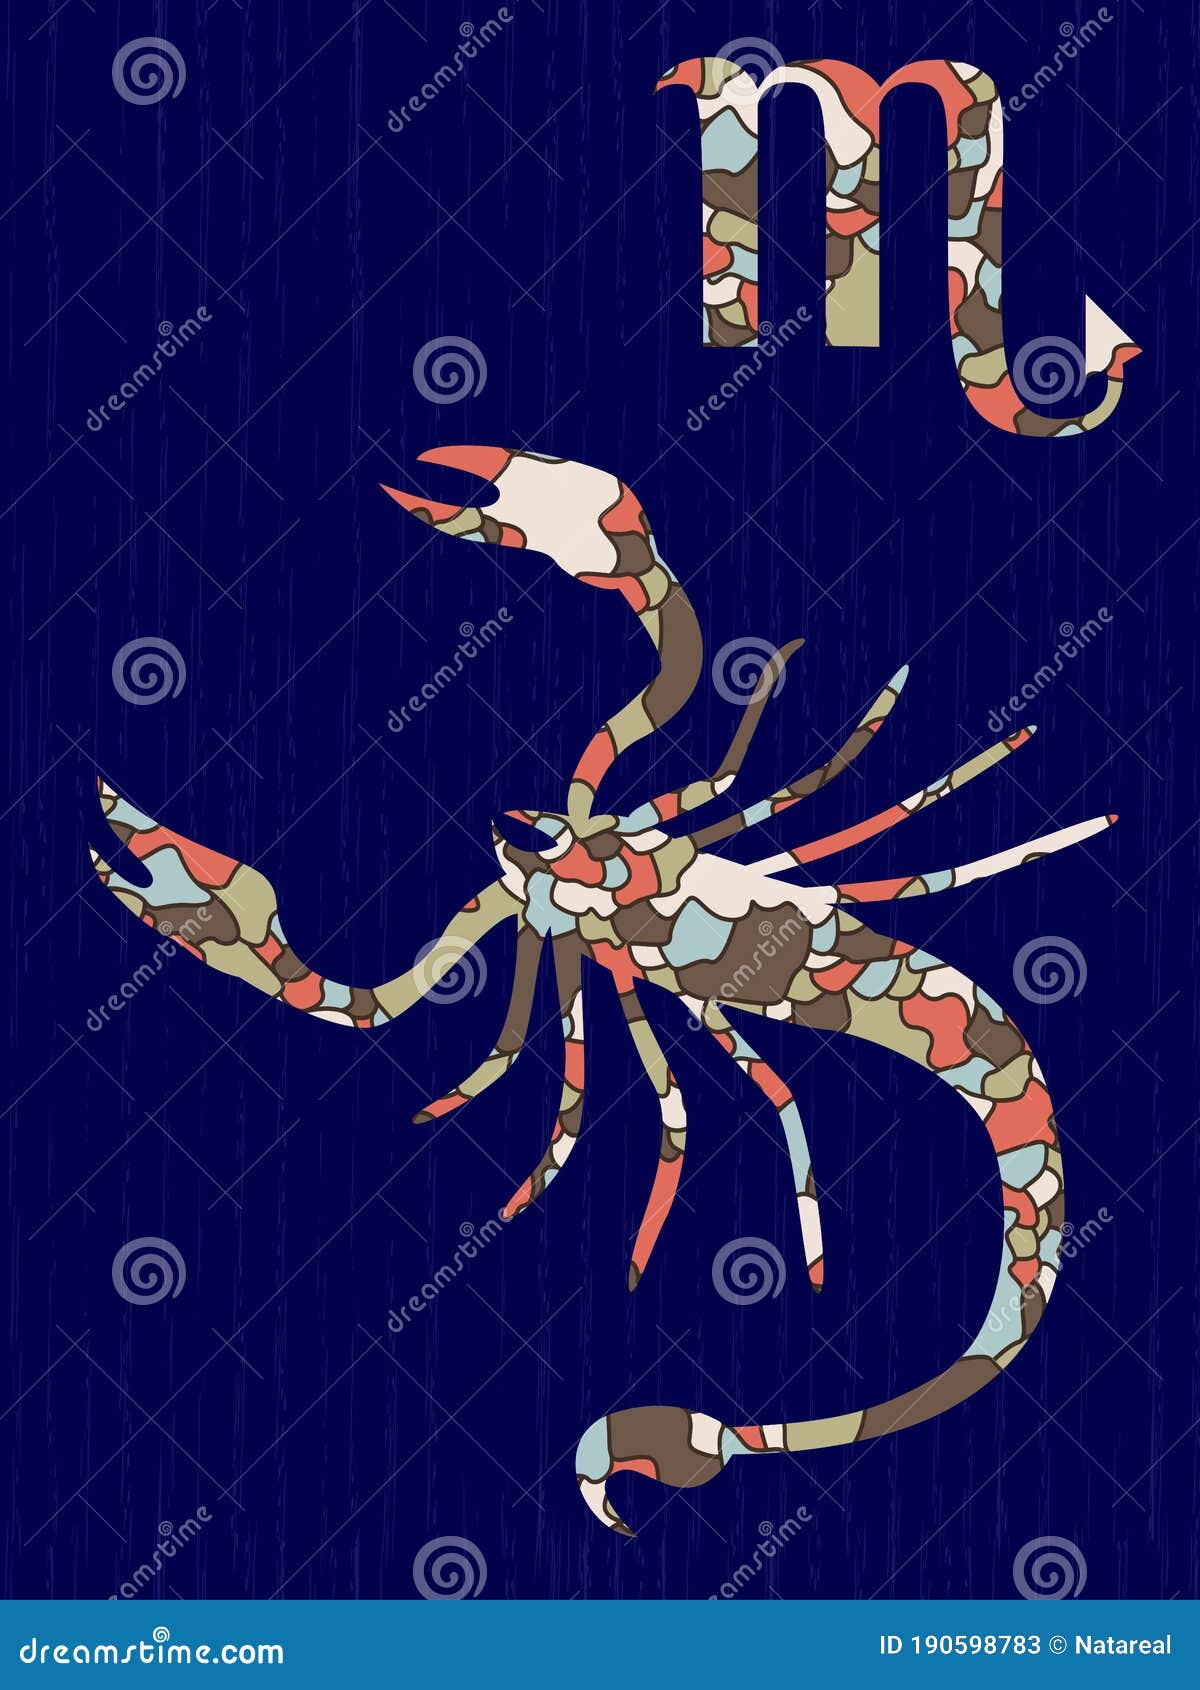 Zodiac Sign Scorpio with Colorful Muted Mosaic Shapes Stock Vector ...